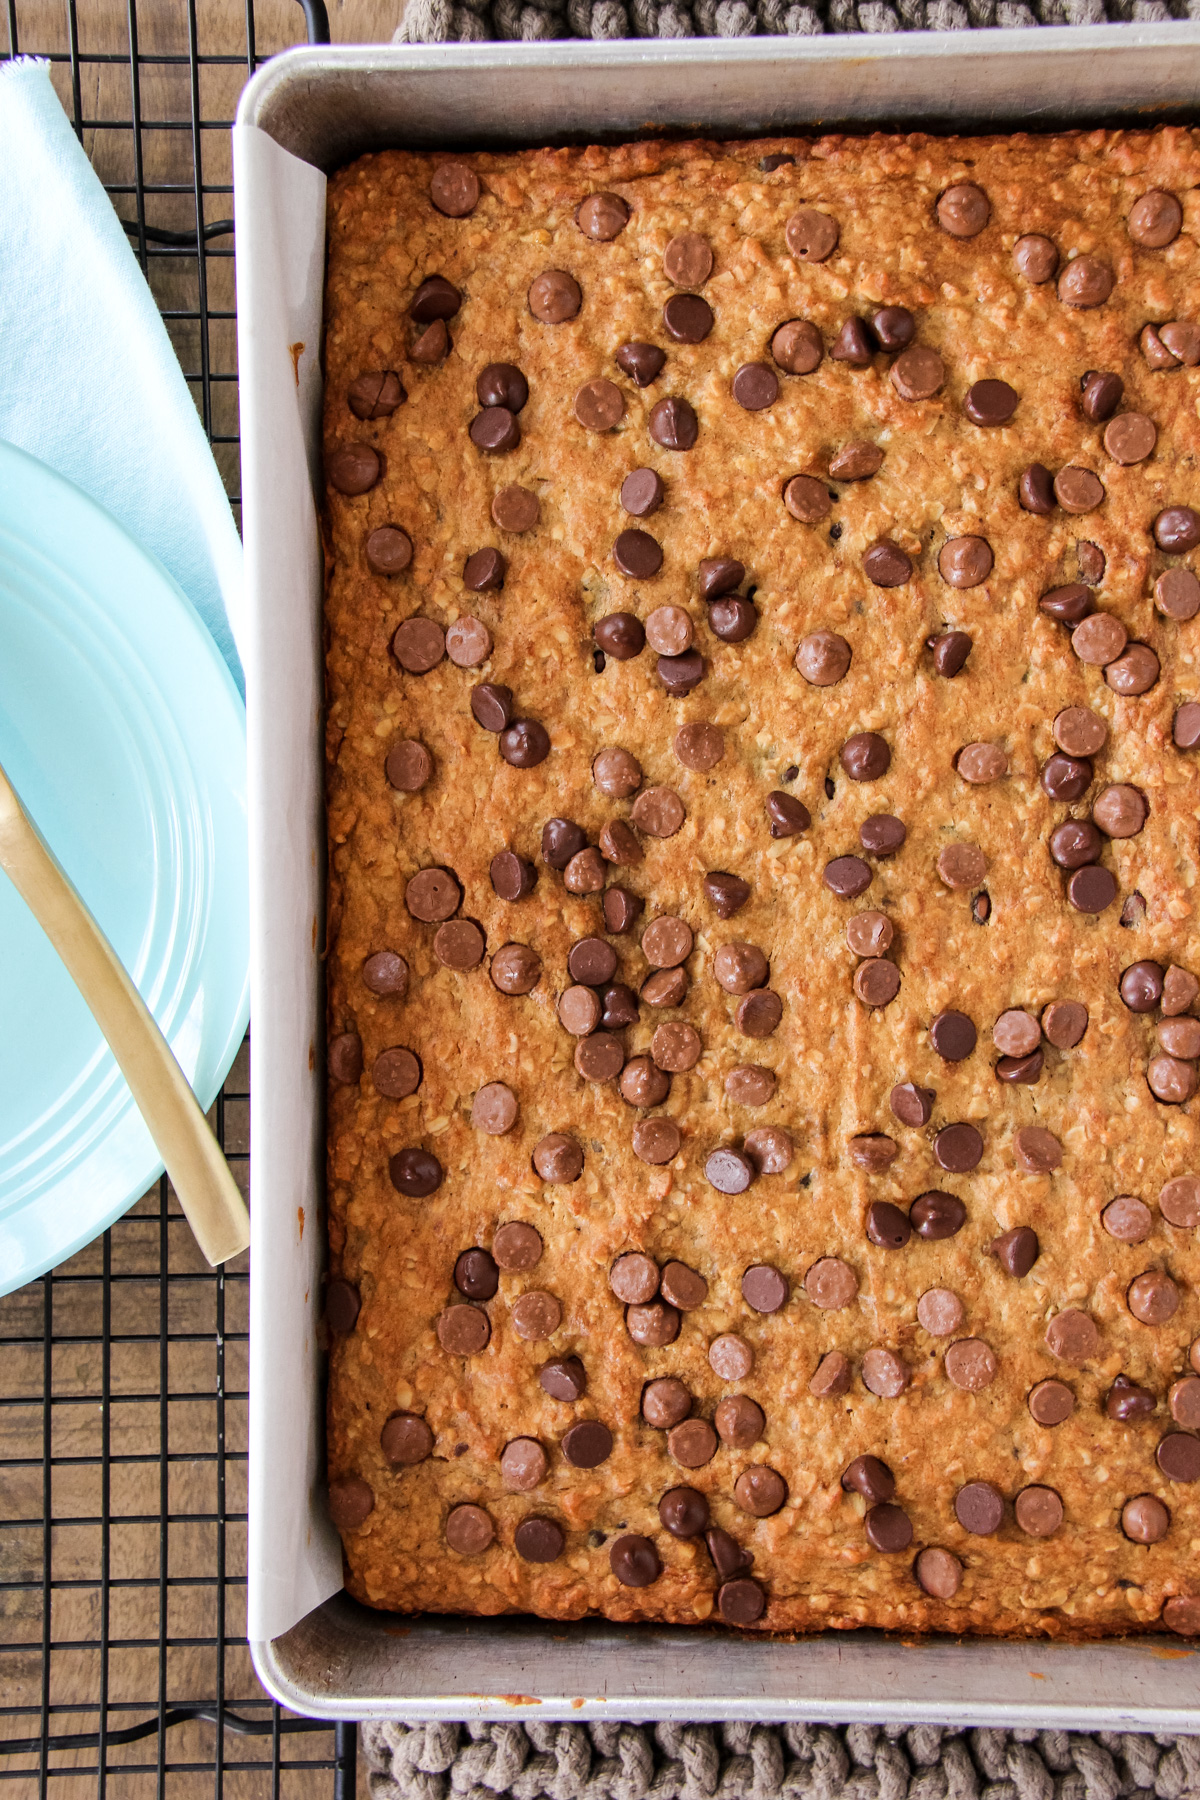 a top down view of baking pan of Peanut Butter Chocolate Chip Banana Oatmeal Bars